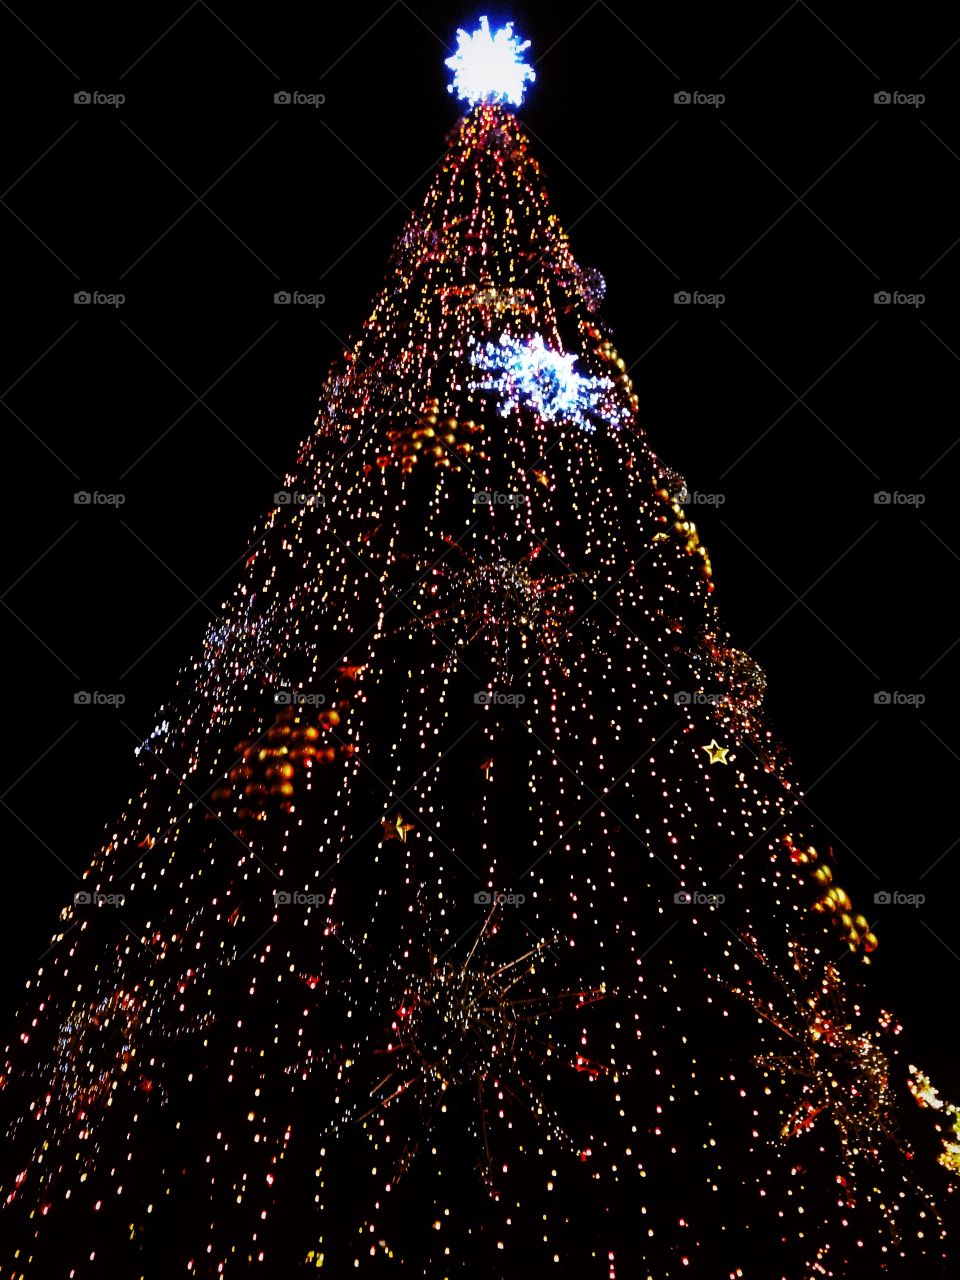 Bright colored illumination on artificial Christmas fir tree in the evening on black sky background in Moscow, Russia